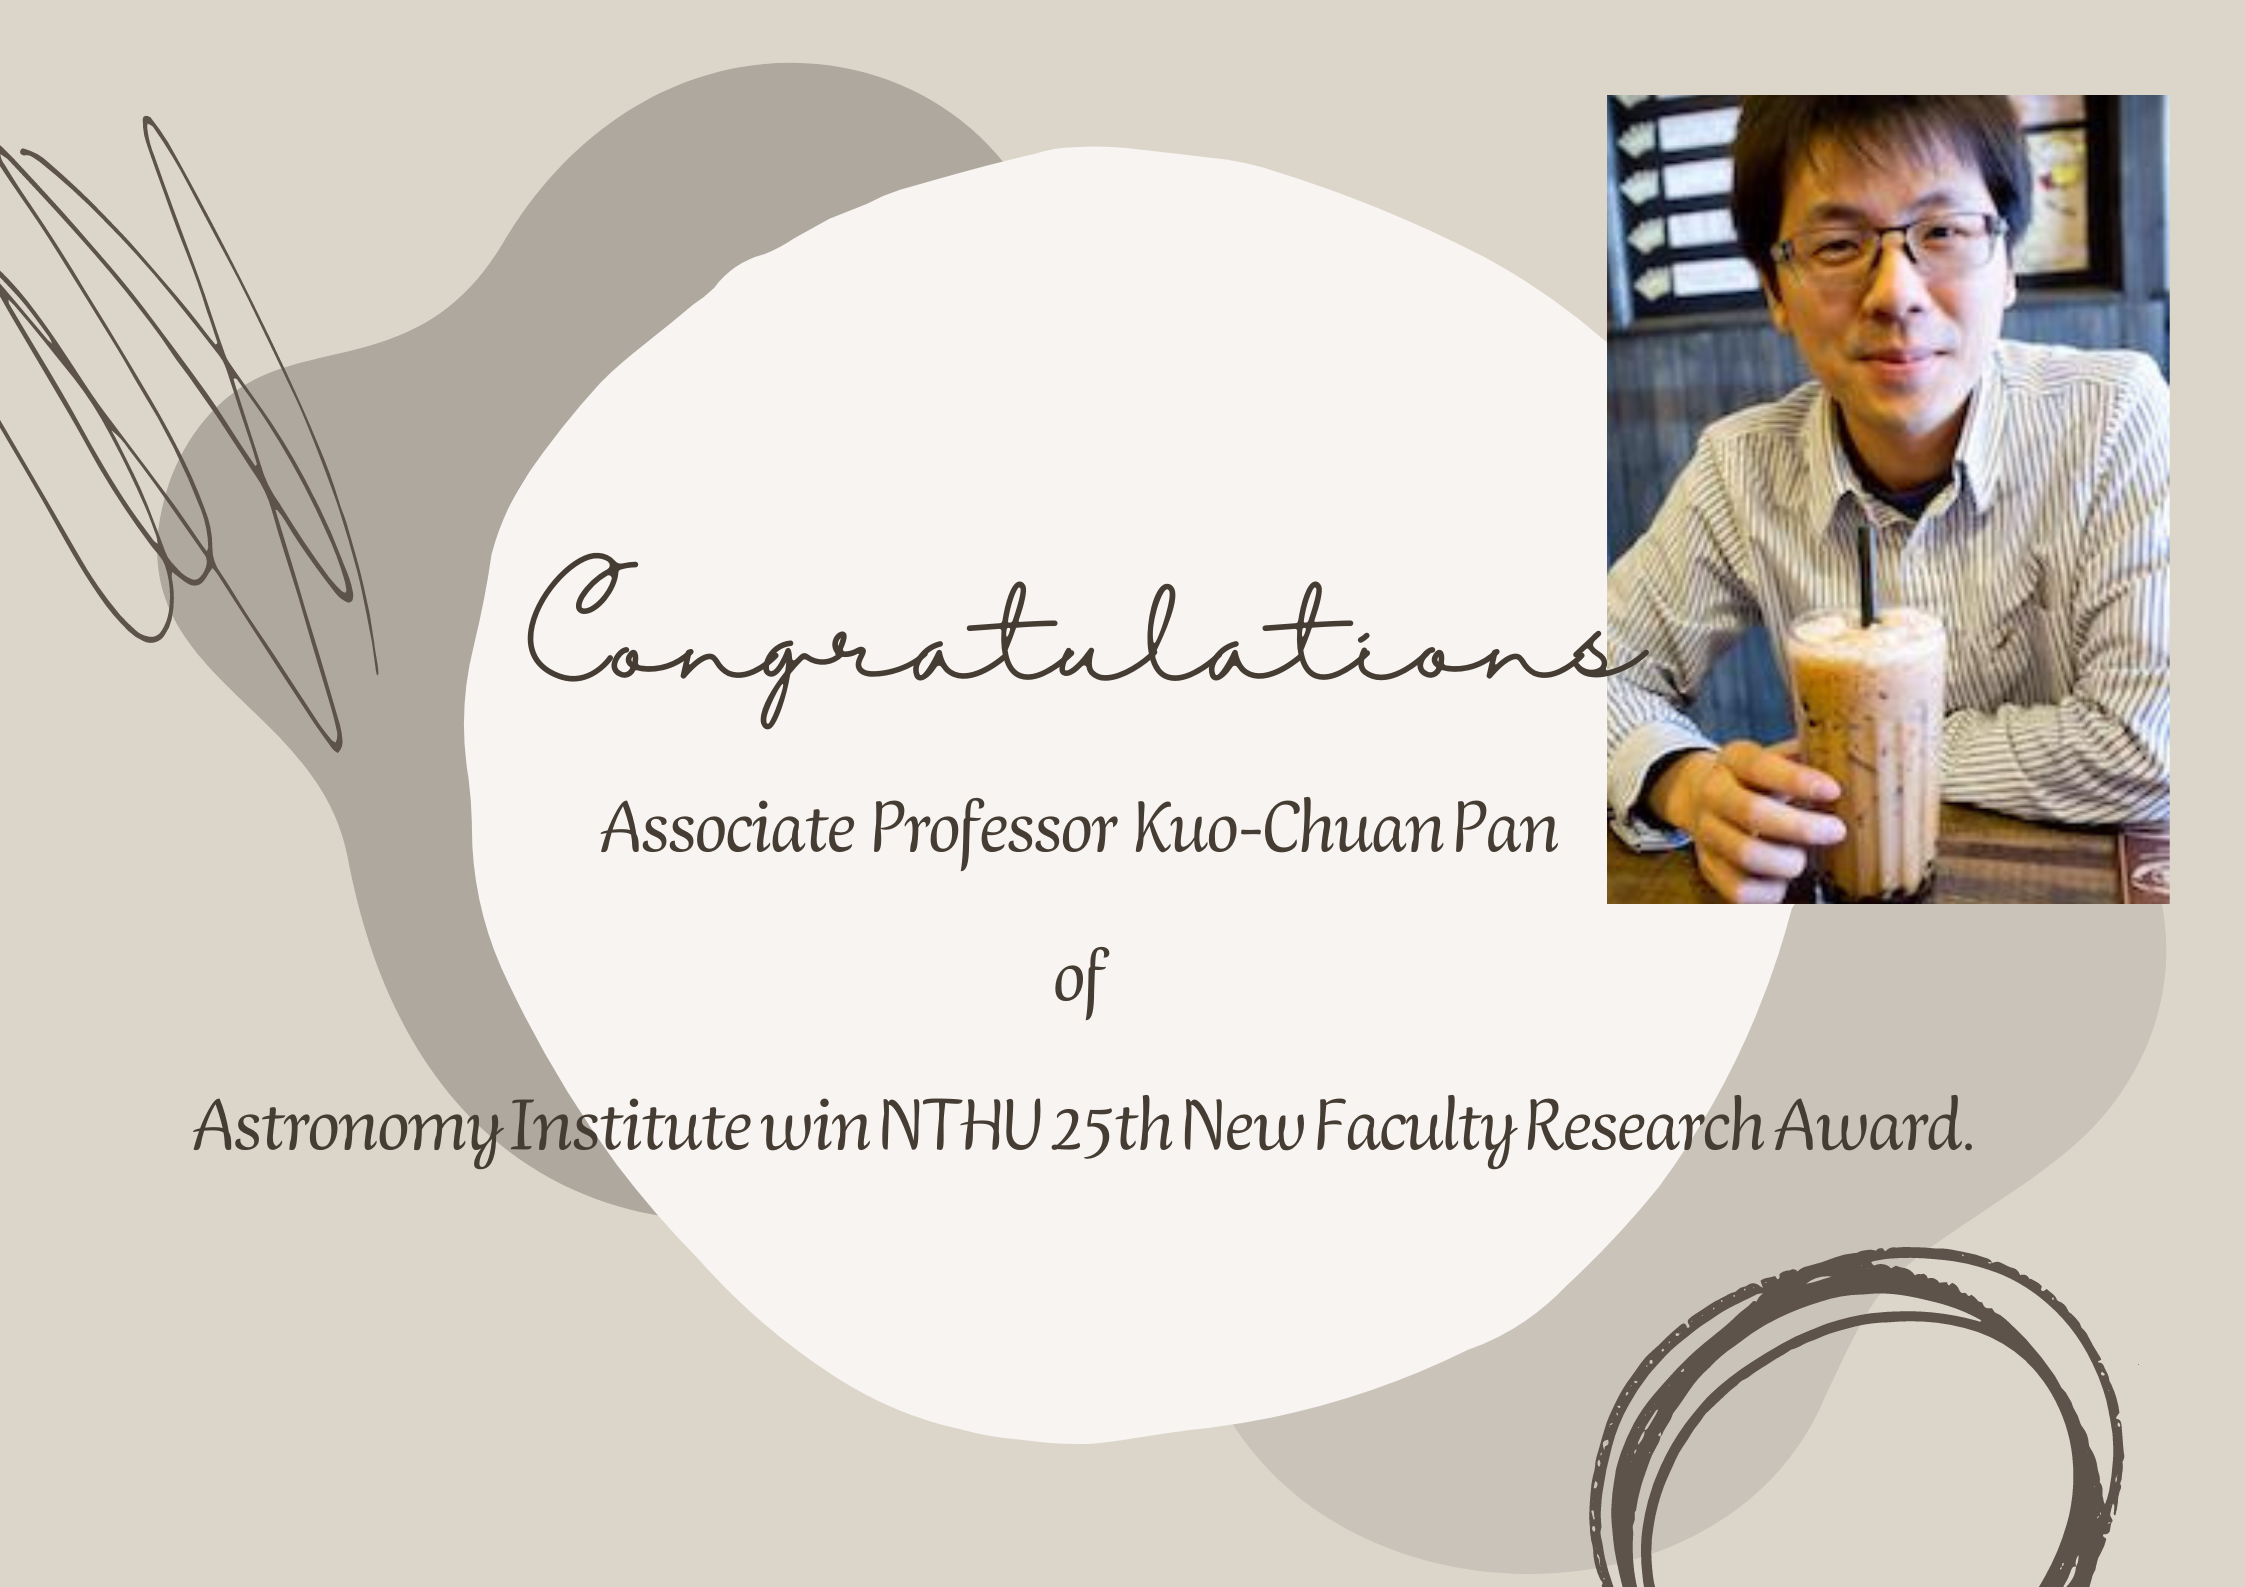 Astronomy Institute win NTHU 25th New Faculty Research Award.